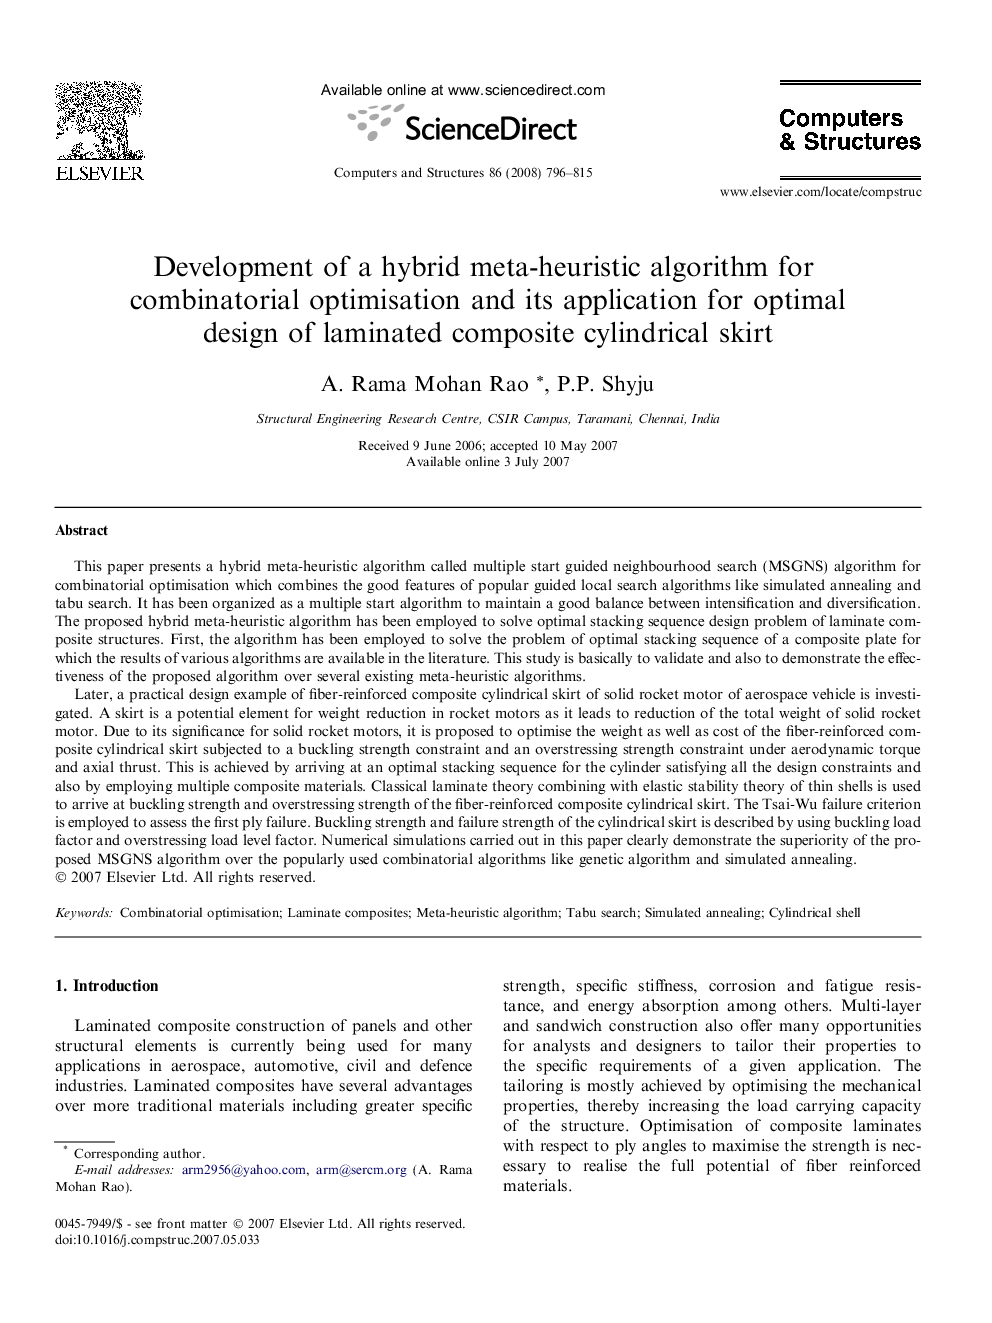 Development of a hybrid meta-heuristic algorithm for combinatorial optimisation and its application for optimal design of laminated composite cylindrical skirt